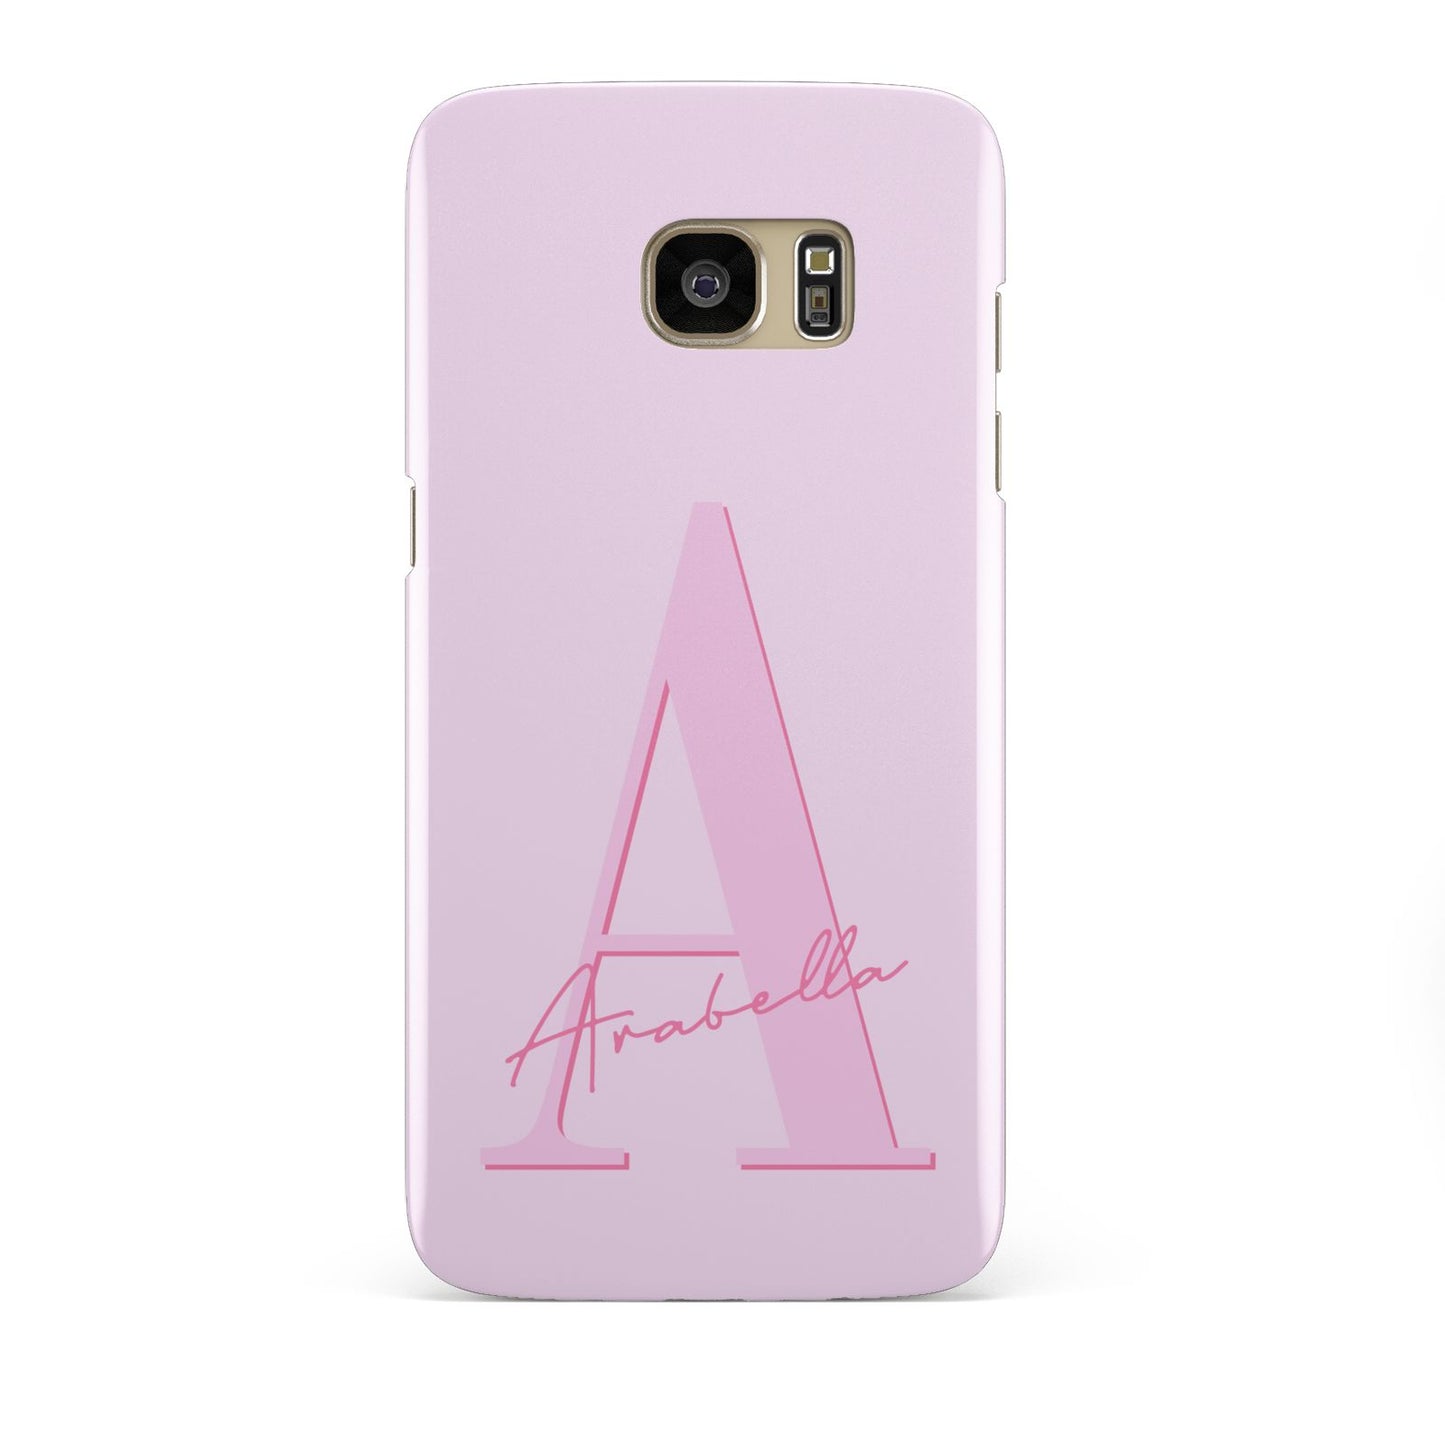 Personalised Pink Initial Samsung Galaxy S7 Edge Case